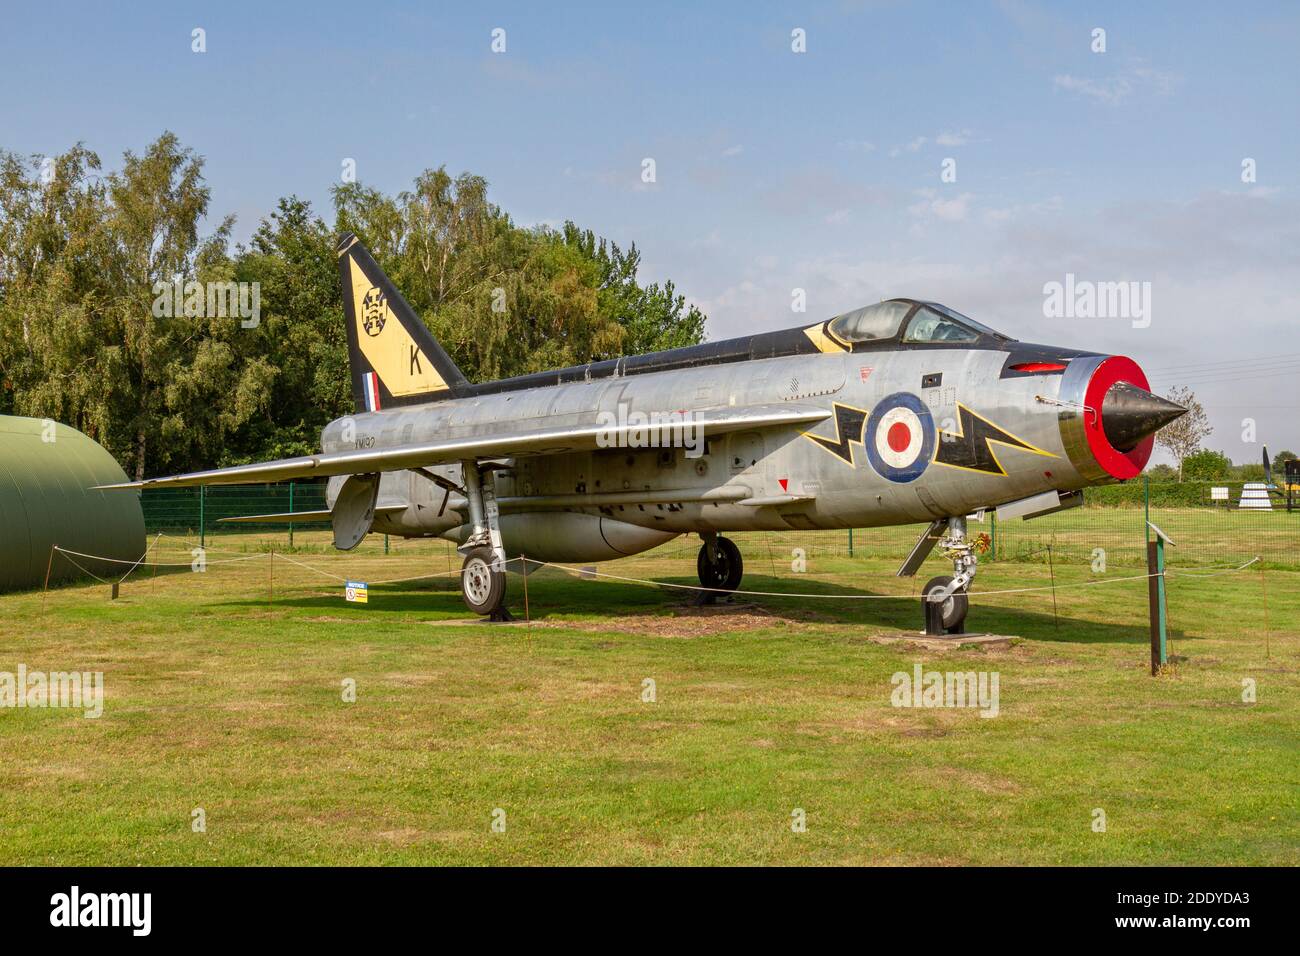 English Electric Lightning F1A British fighter aircraft, Thorpe Camp Visitor Centre, a WWII Royal Air Force barracks, Lincolnshire, UK. Stock Photo